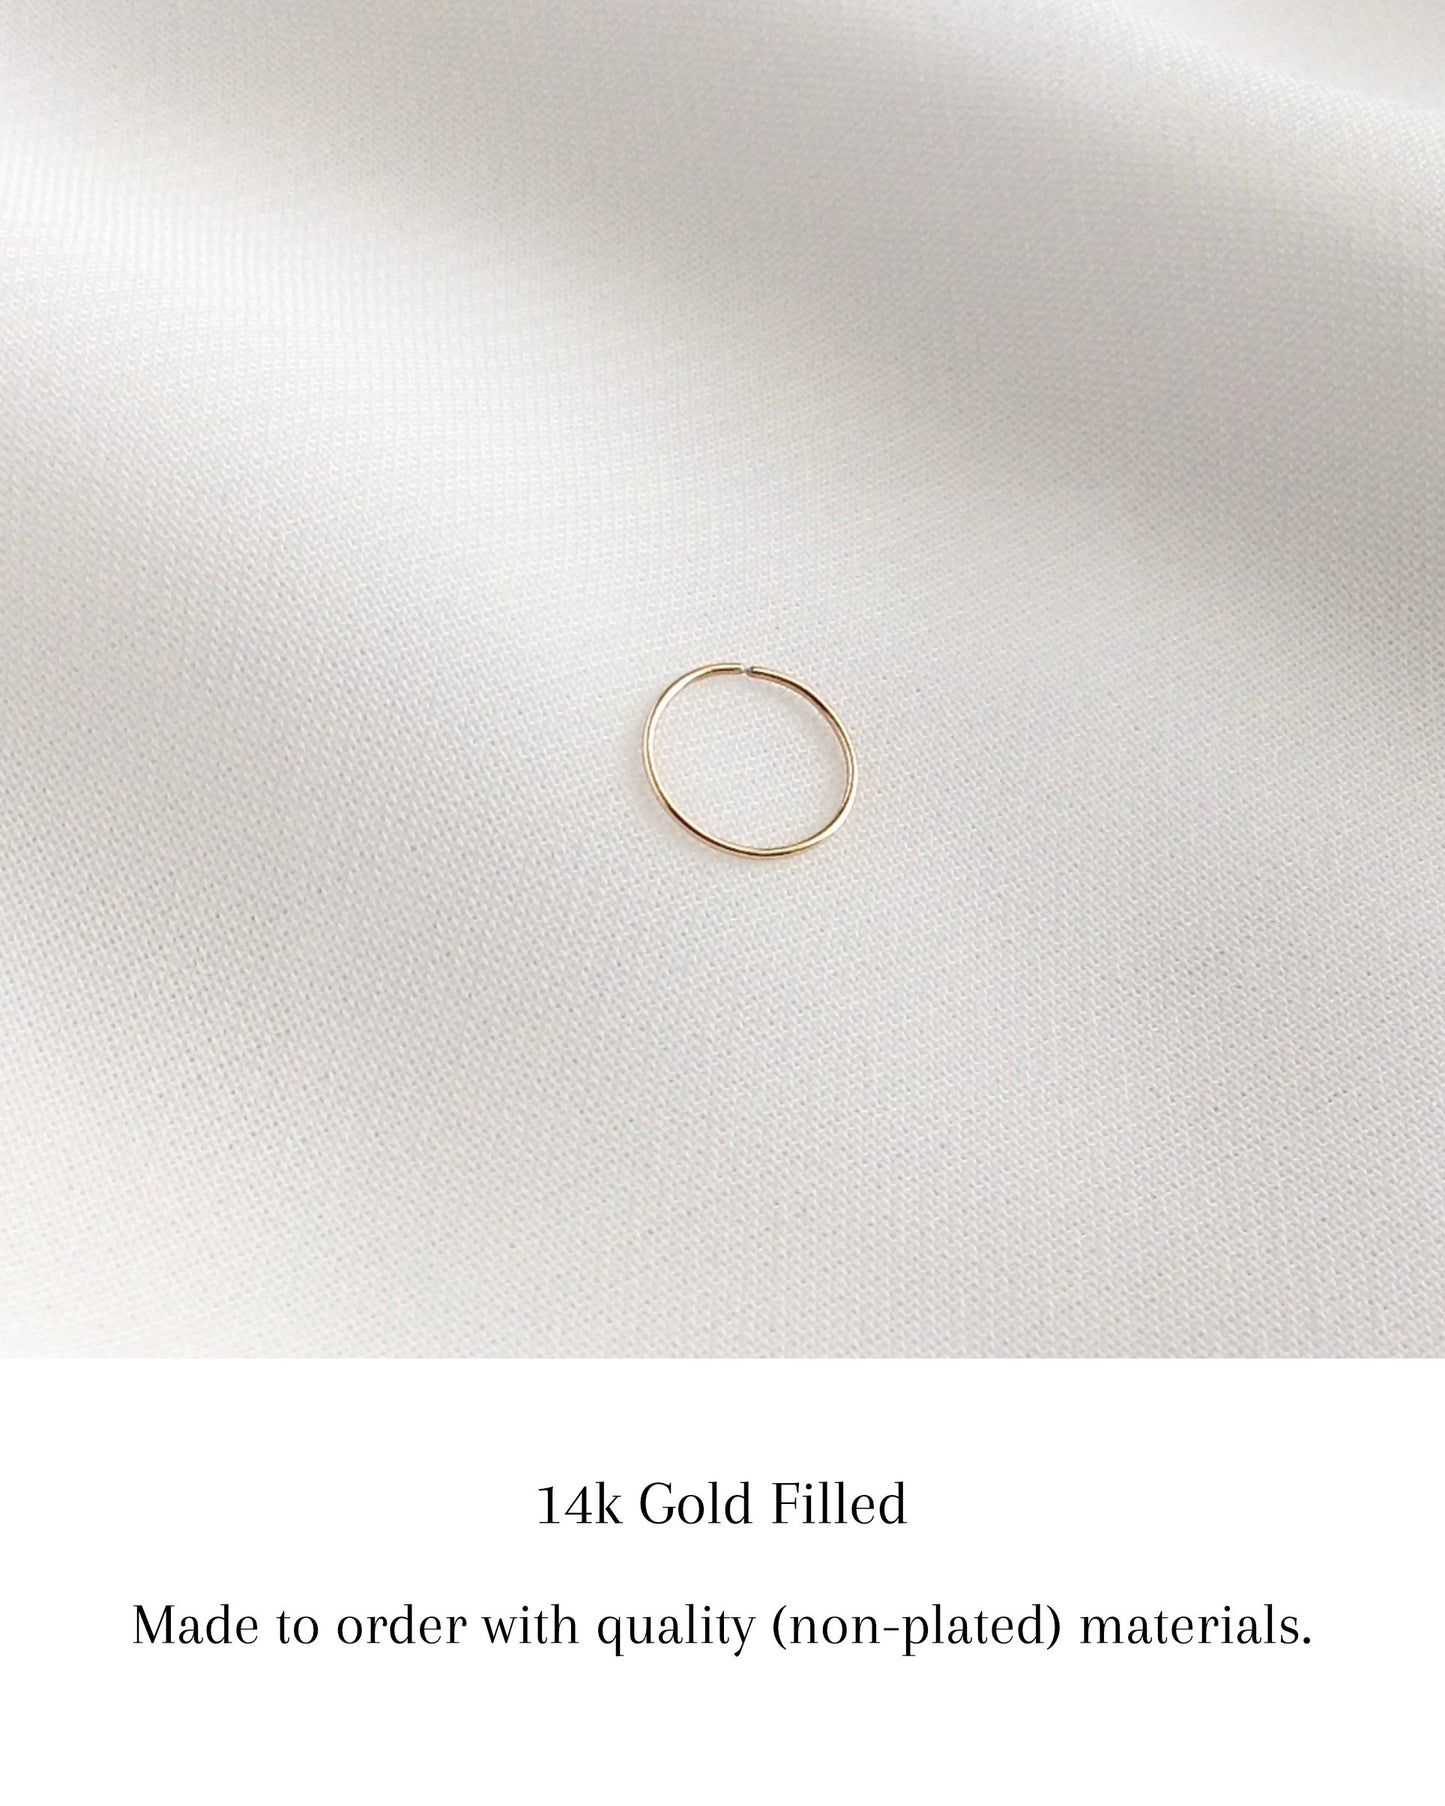 Gold Filled Nose Hoop Quality Materials | IB Jewelry